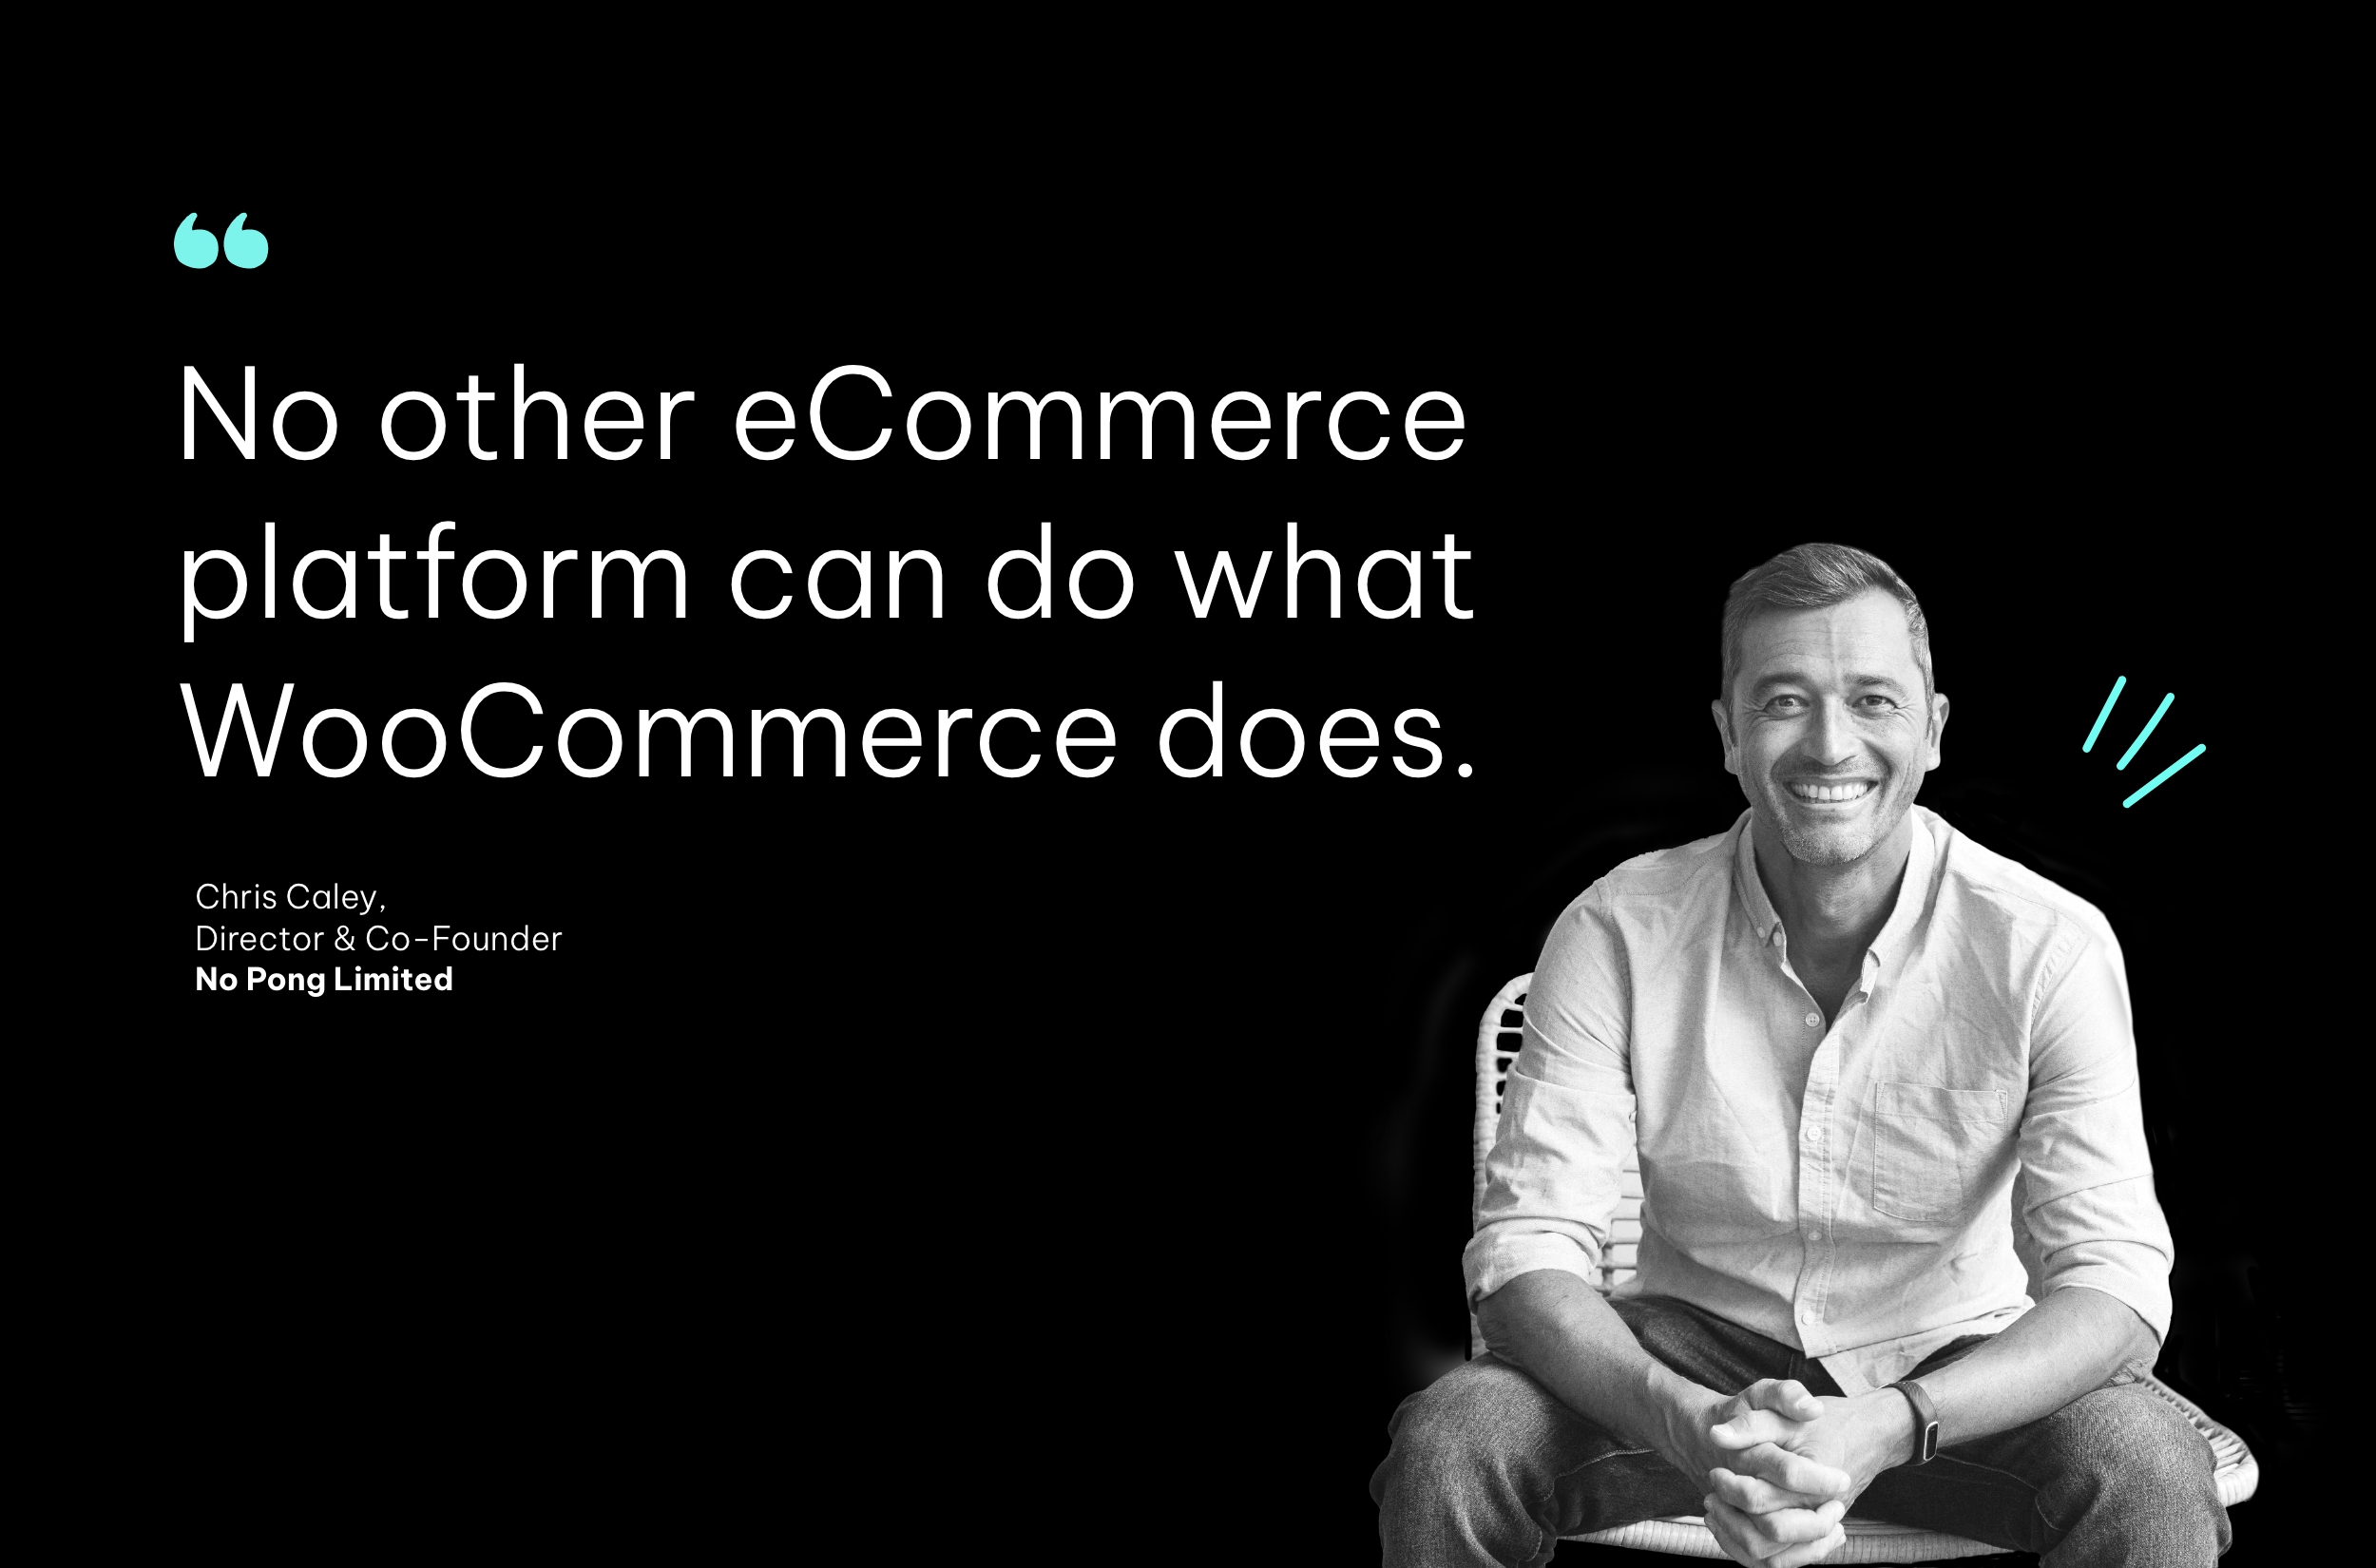 No other eCommerce platform can do what WooCommerce does